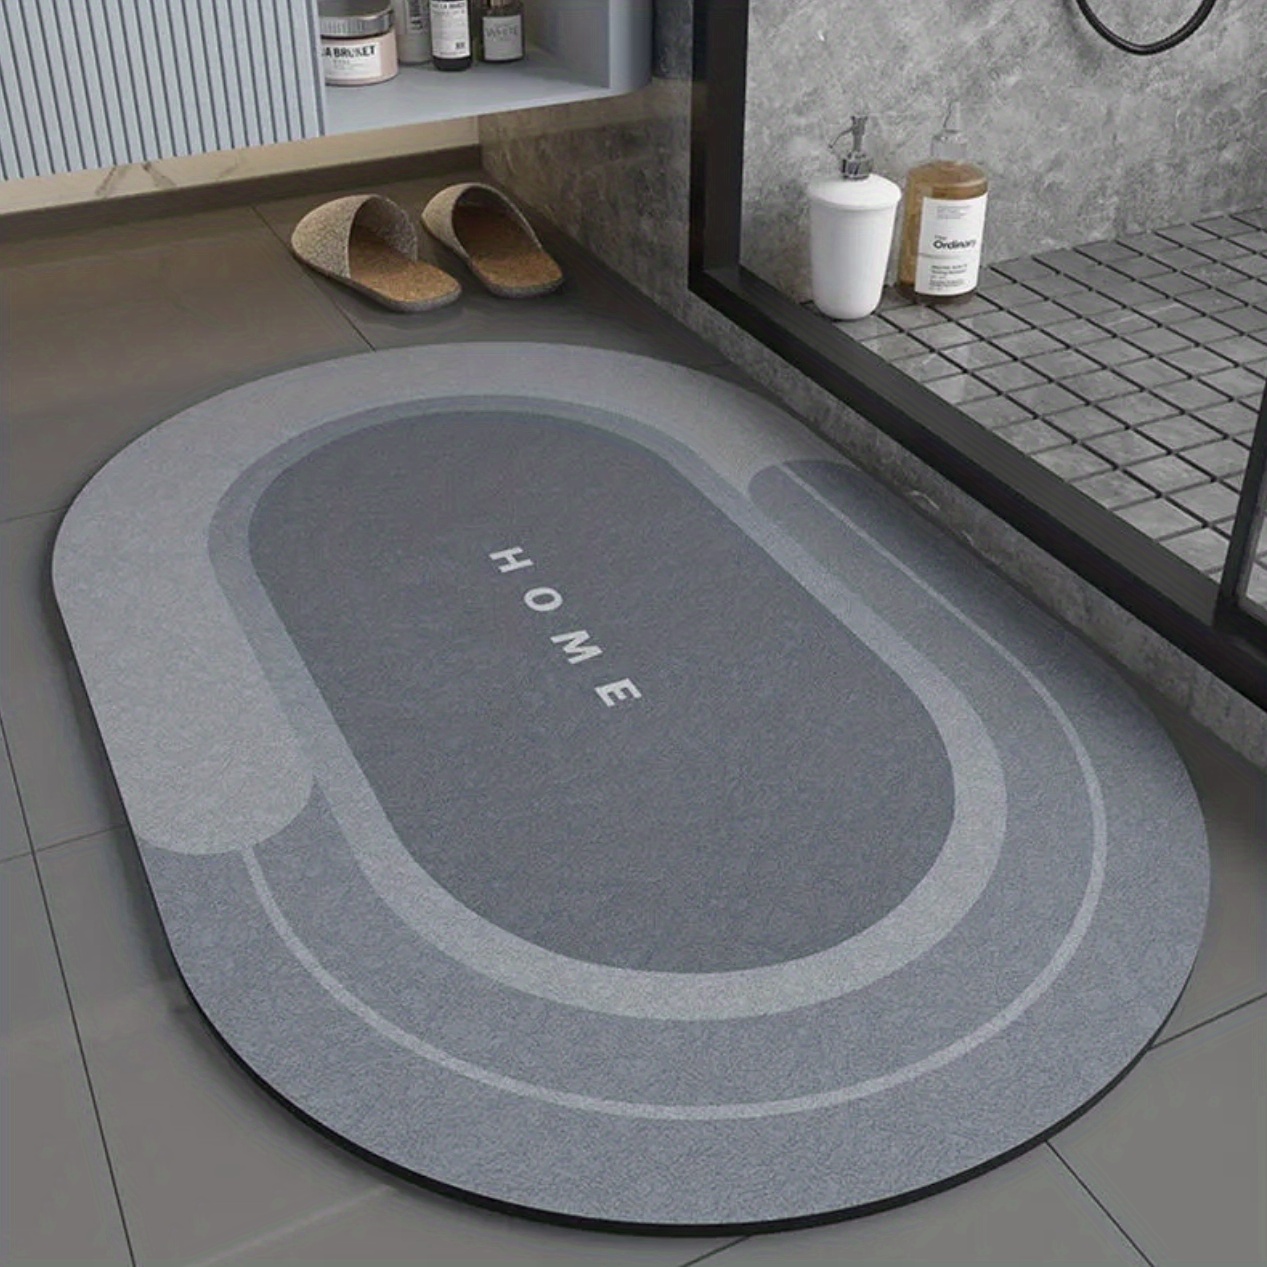 Best bath mats to prevent slips and protect your floor